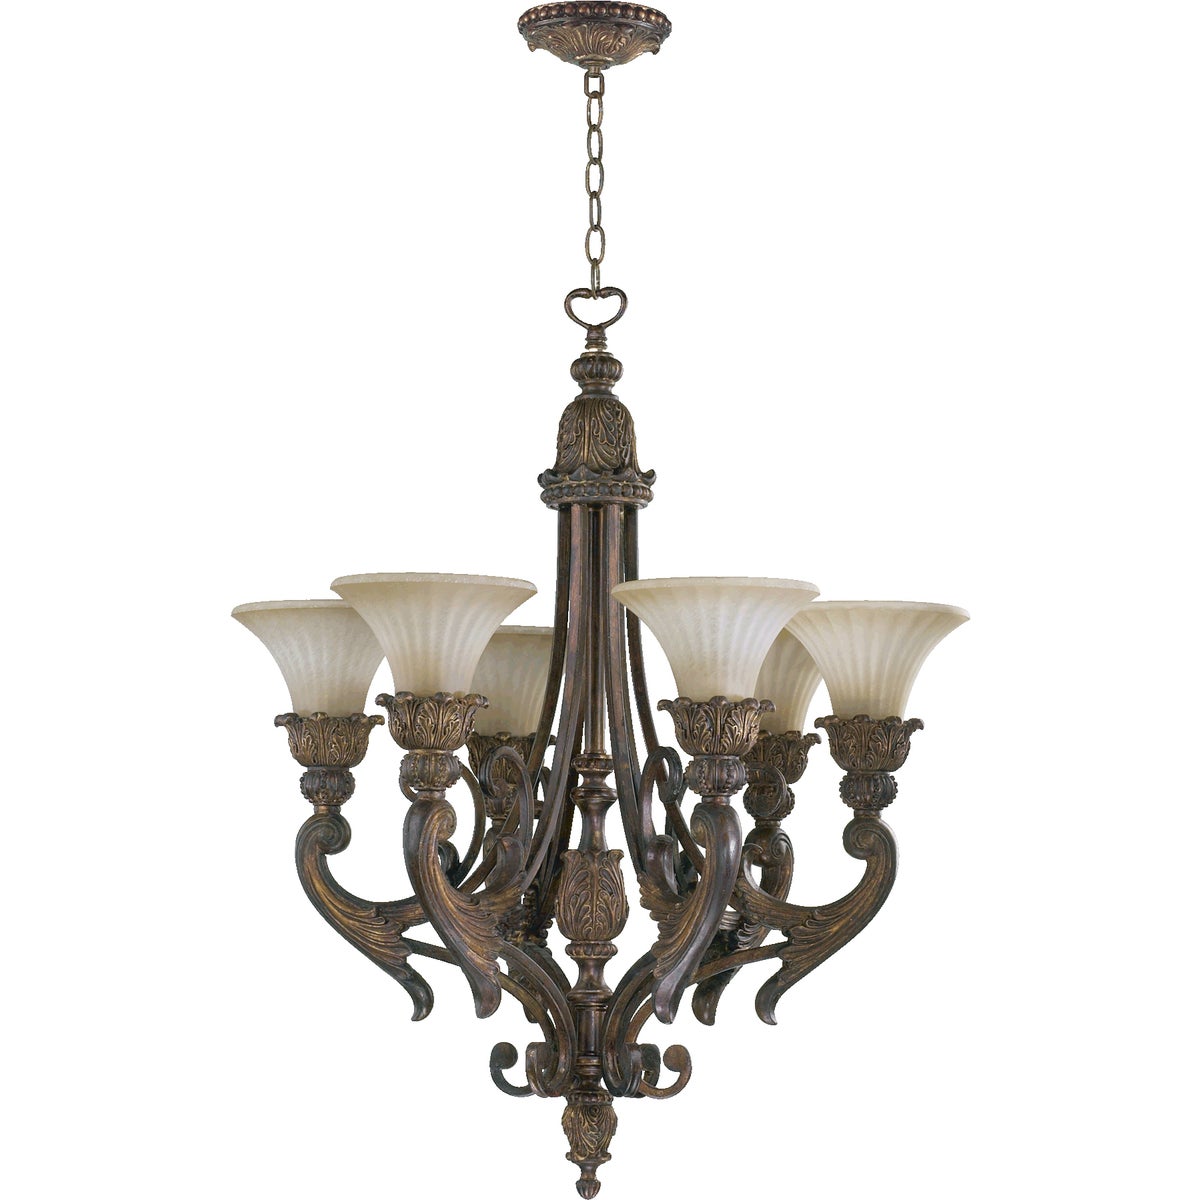 A traditional chandelier with a corsican gold finish, featuring ornate wood and bronze detailing.